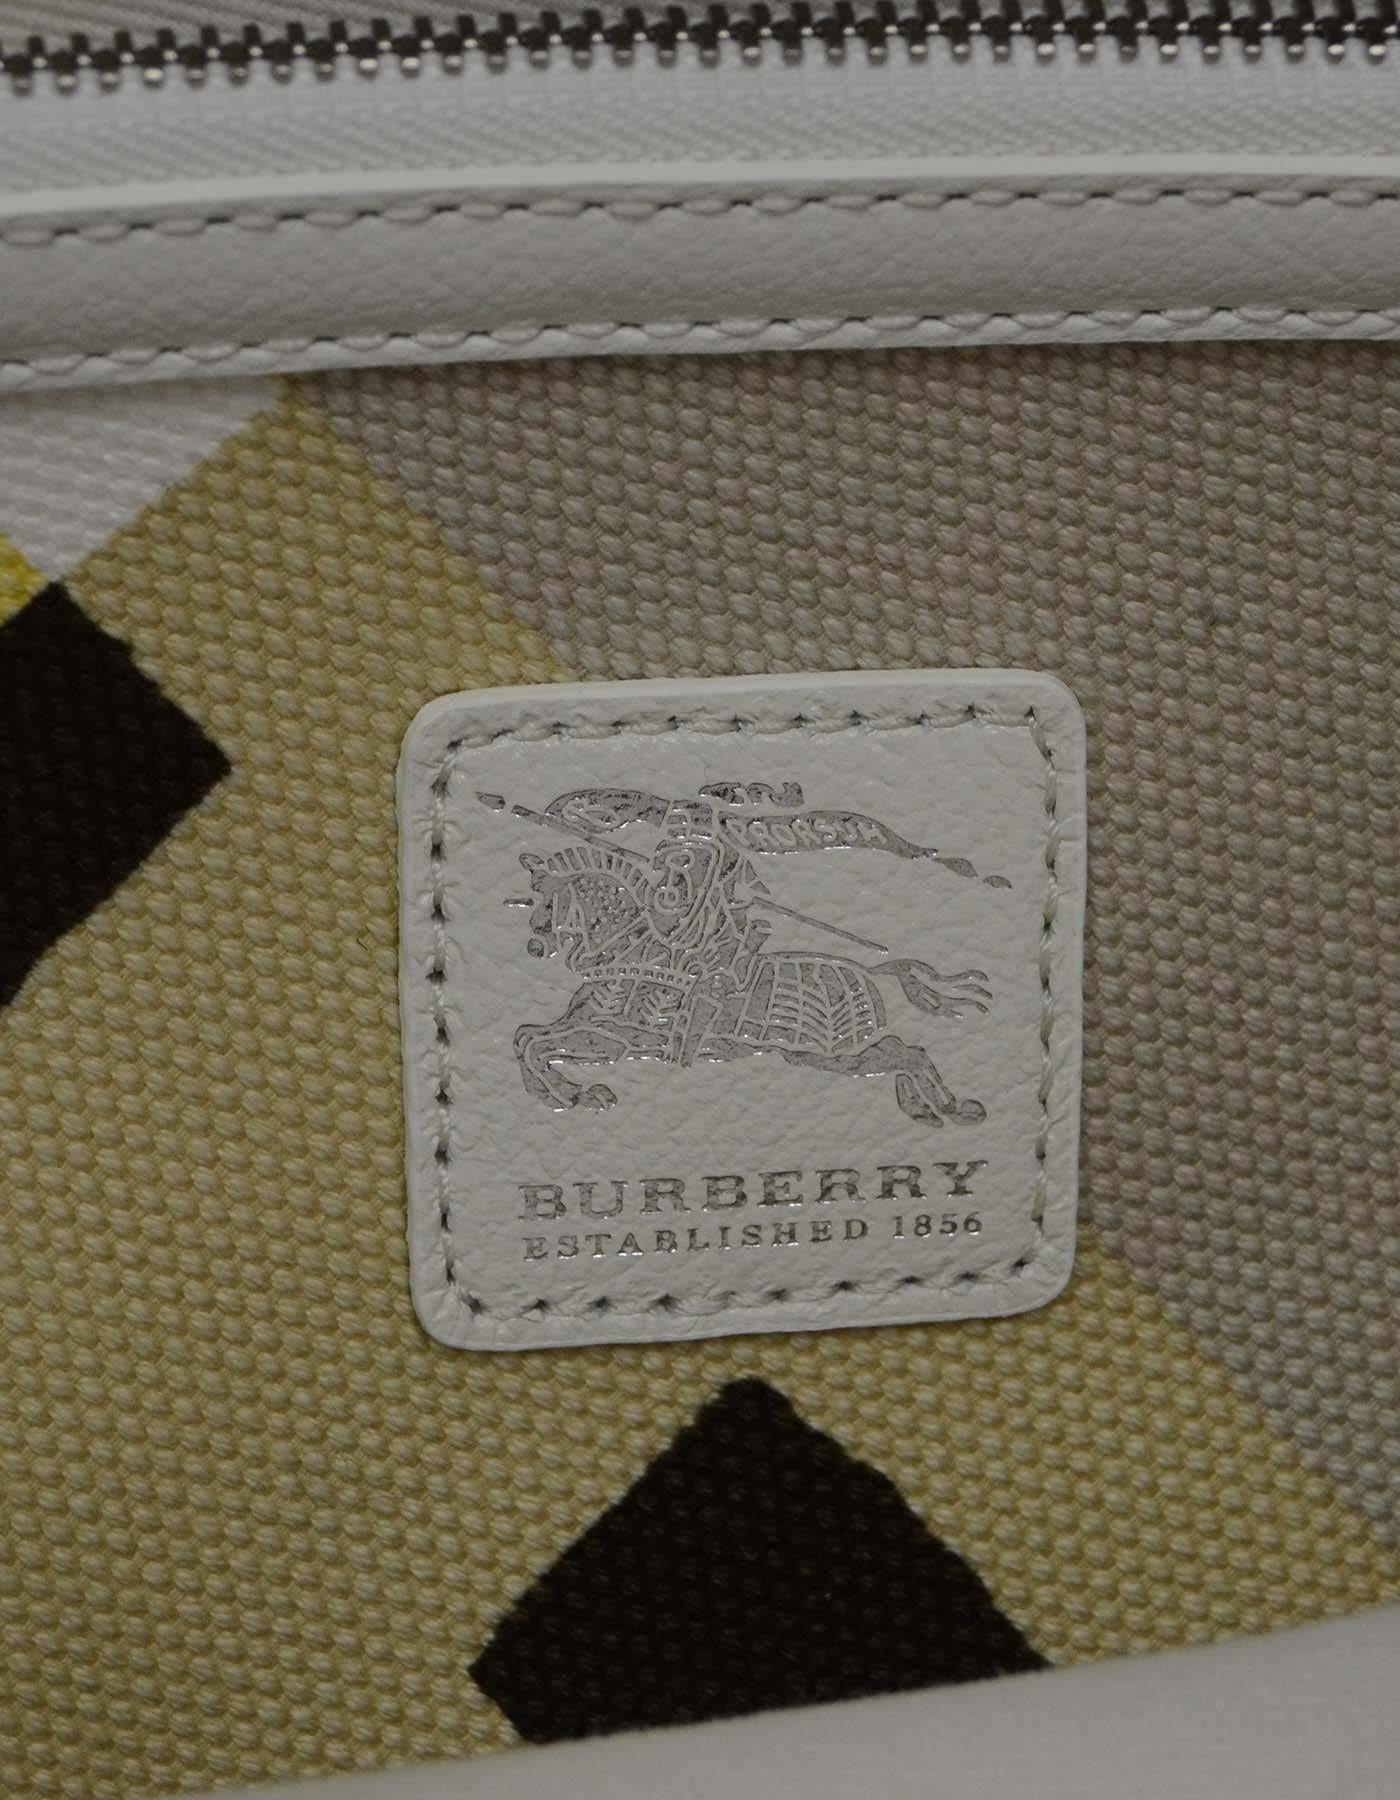 Burberry New Multi-Colored Printed Canvas Tote Bag SHW 2